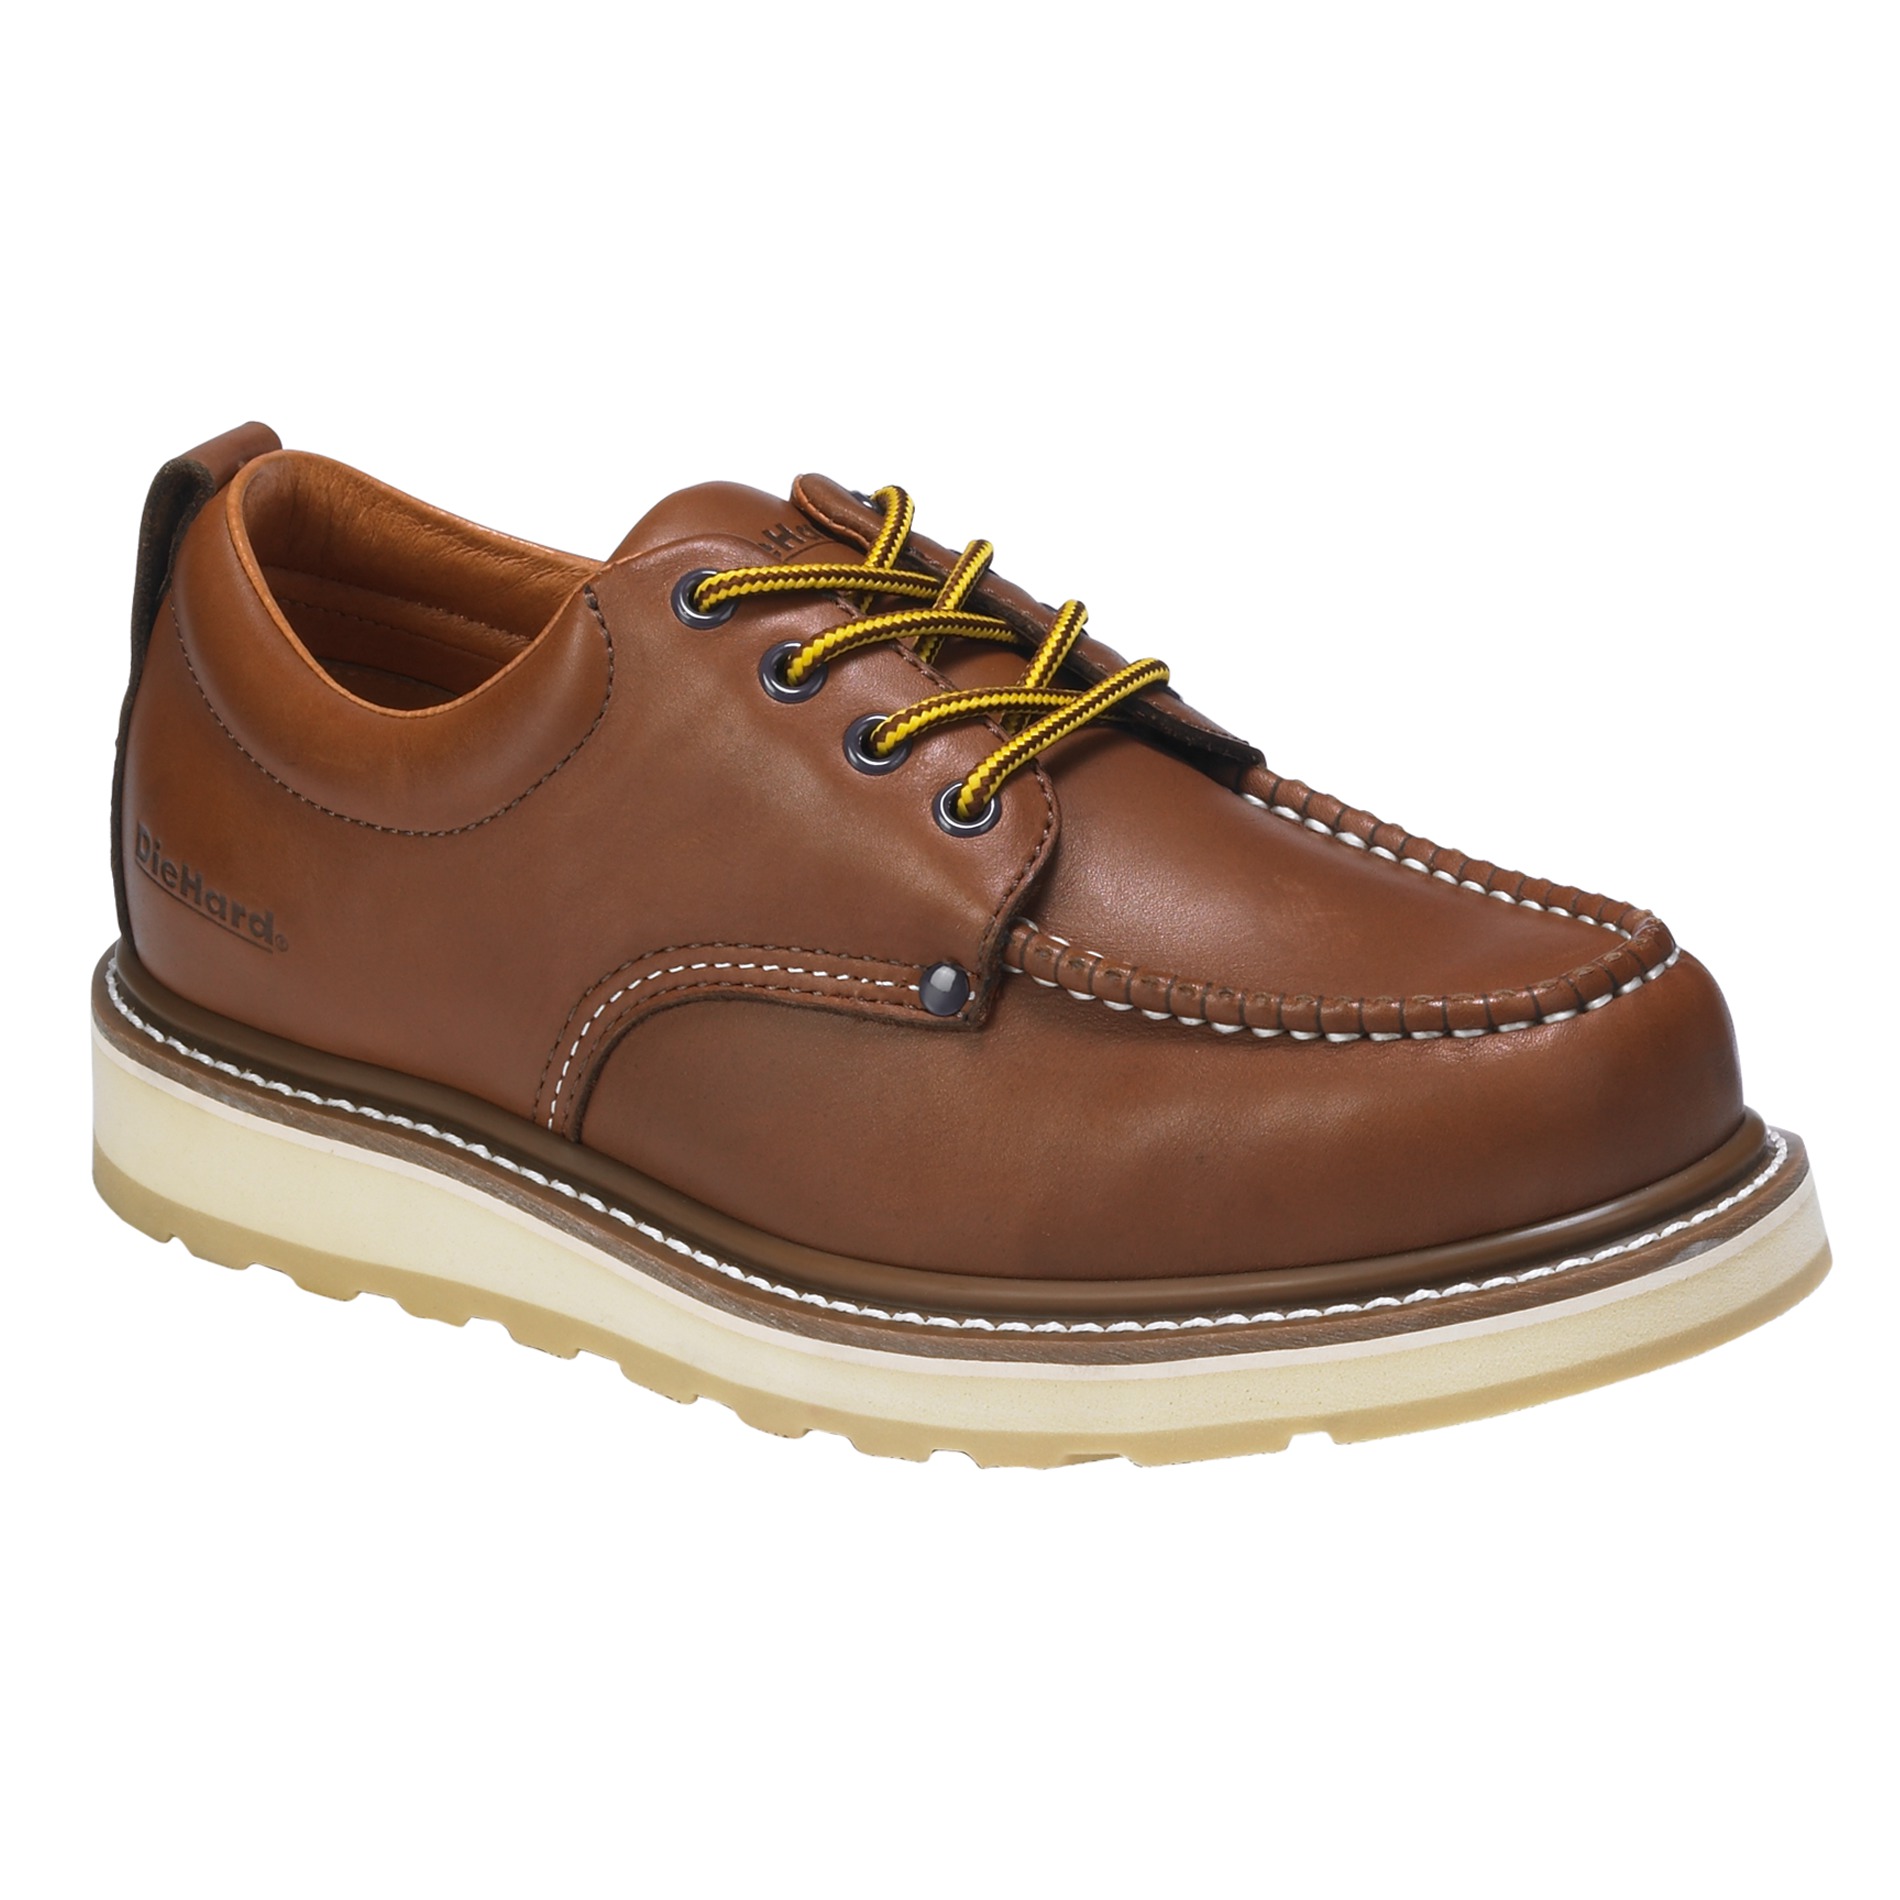 Soft Toe Leather Oxford Work Shoe - Brown